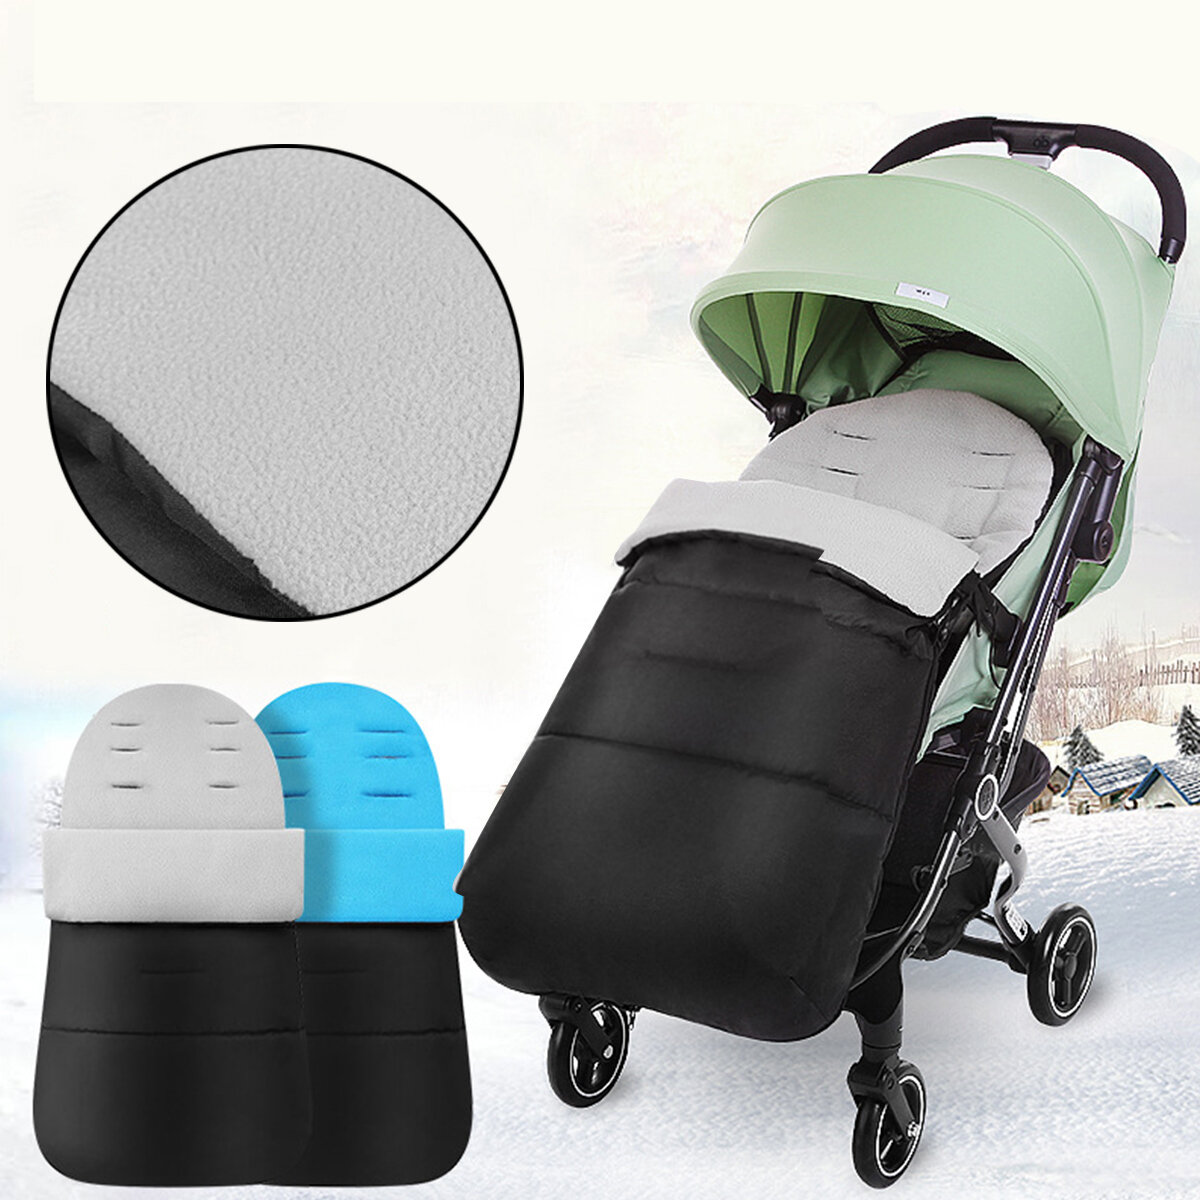 Universal Baby Stroller Foot-muff Cover Toddler Warm Toes Apron Liner Pram Autumn Winter Outdoor Travel